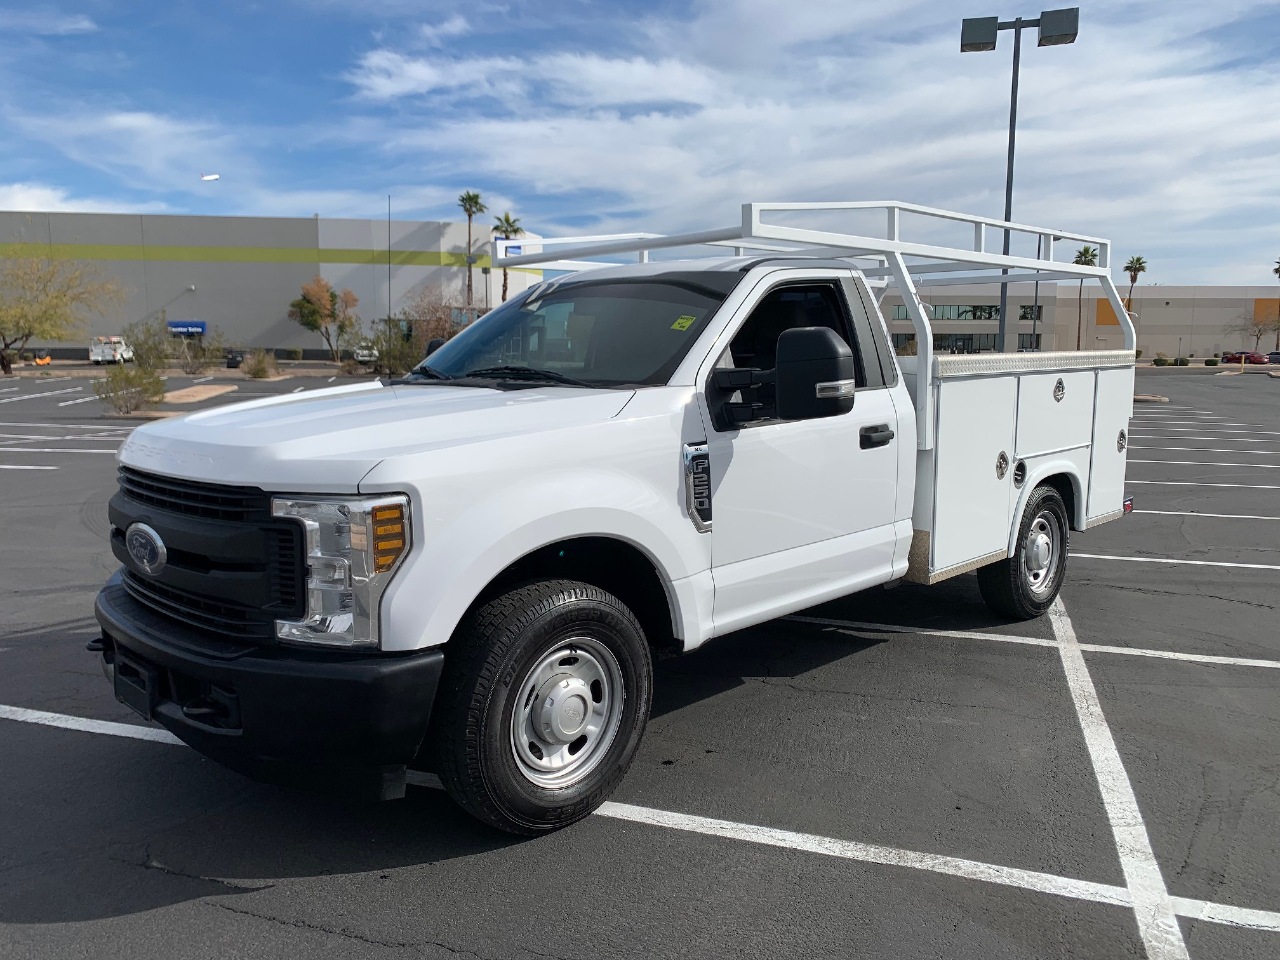 USED 2018 FORD F250 SERVICE - UTILITY TRUCK #3207